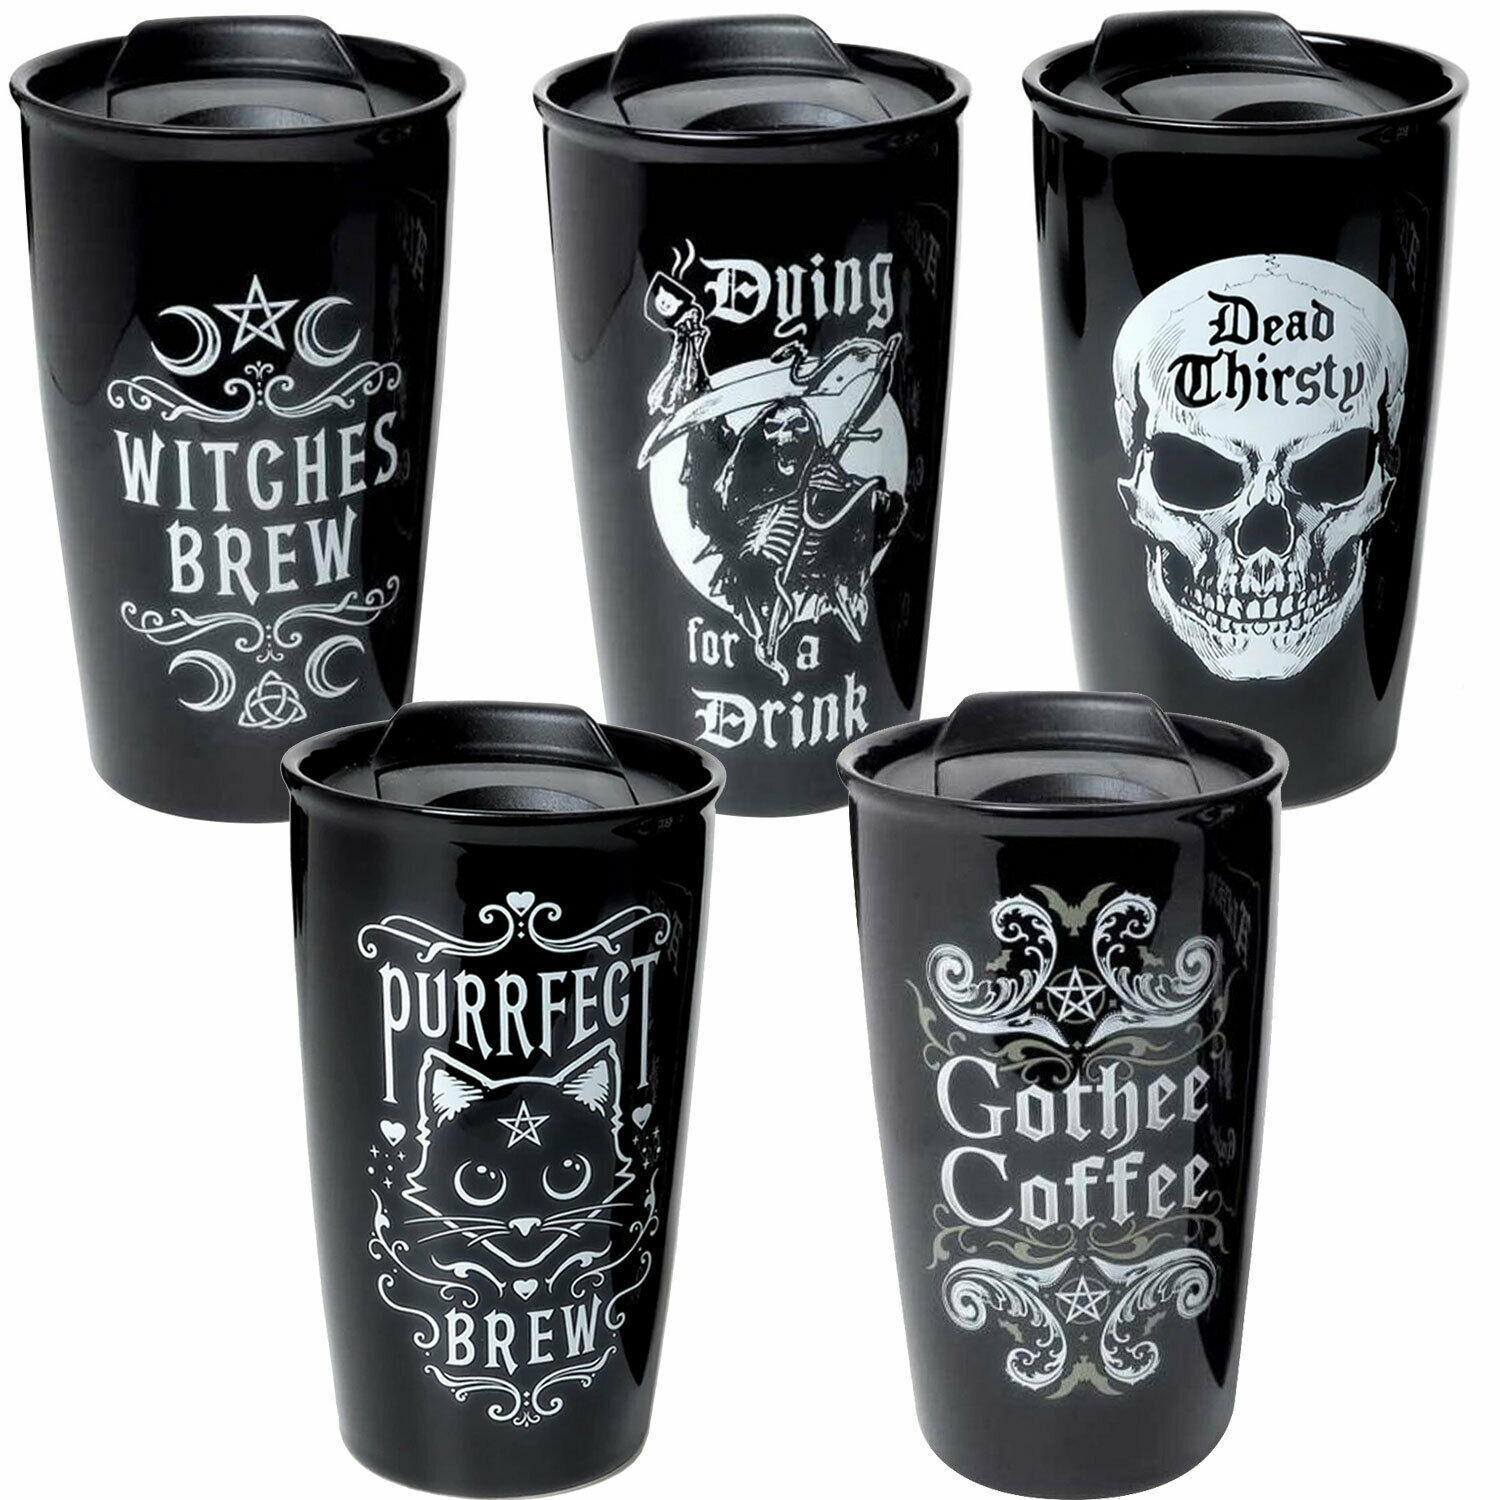 Alchemy Gothic Ceramic Travel Coffee Mug Witches Purrfect Brew Gothee Cat Cup - $19.95